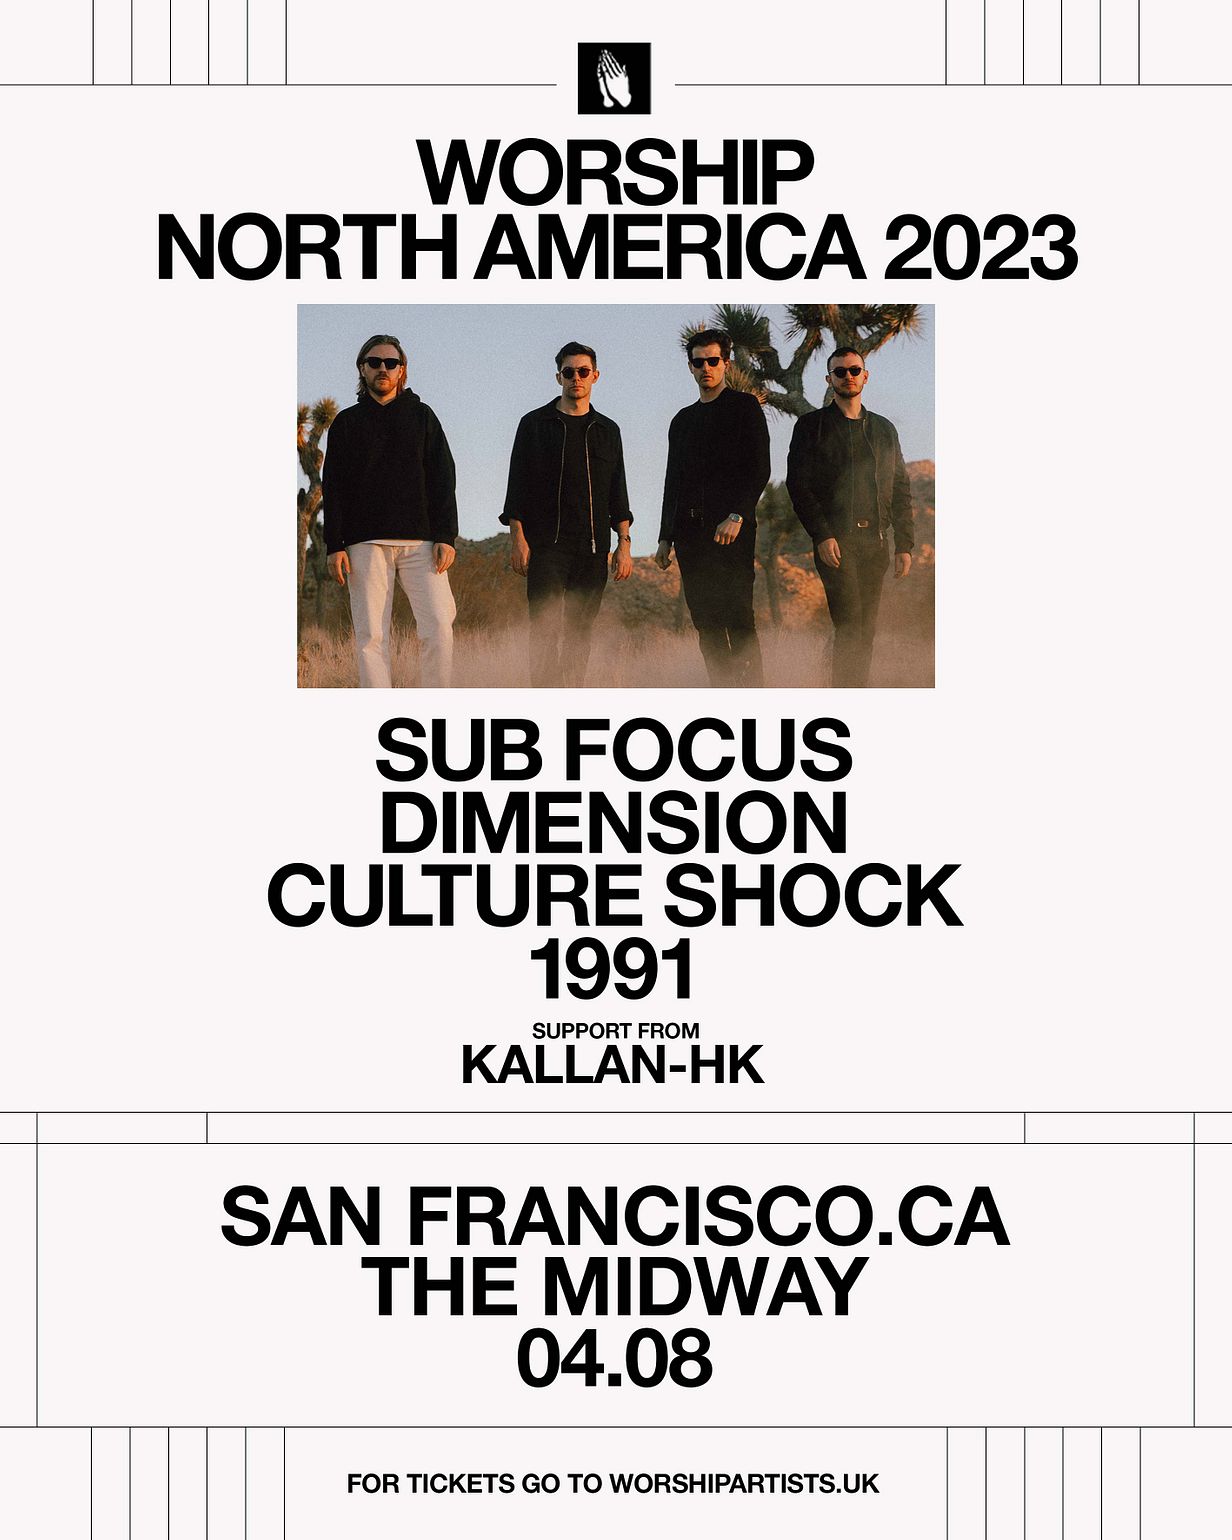 WORSHIP North America Tour 2023 Tickets at The Midway in San Francisco